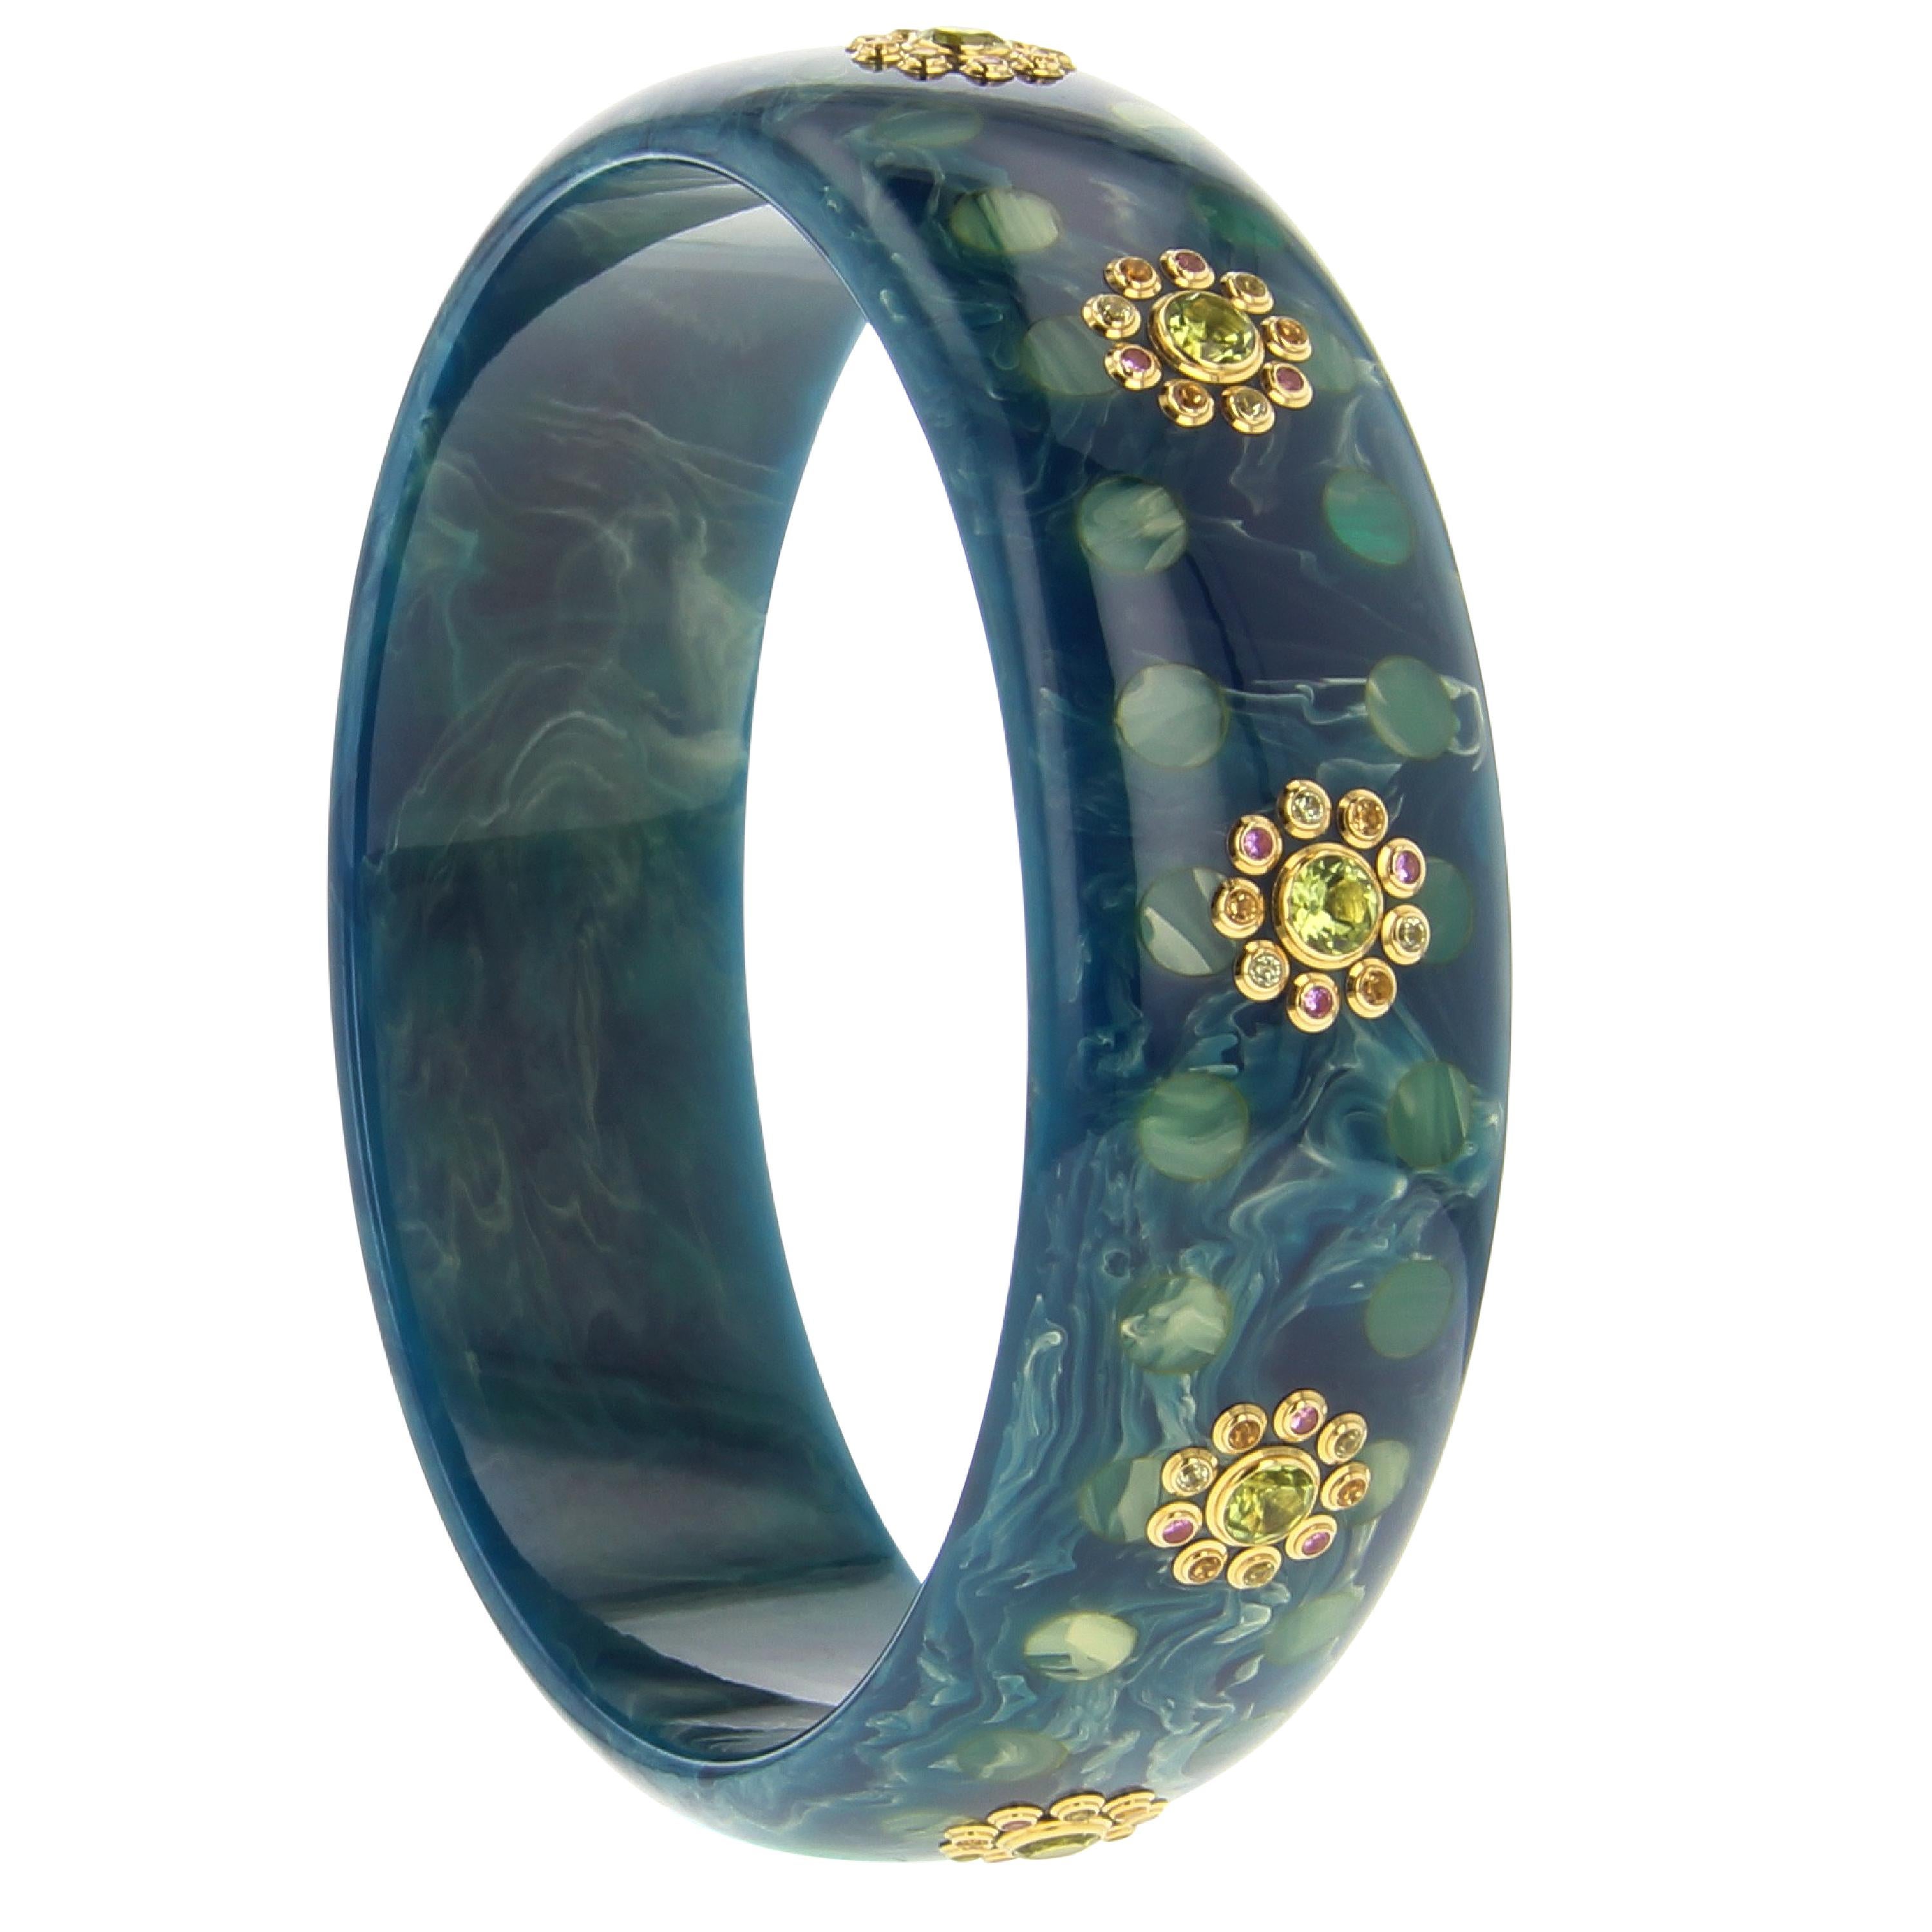 This Mark Davis bangle was made from a beautiful marbled blue bakelite inlaid with a tonal polka dot pattern. Evenly spaced clusters of gemstones circle the bangle. Each cluster is comprised of a central peridot surrounded by smaller peridot,